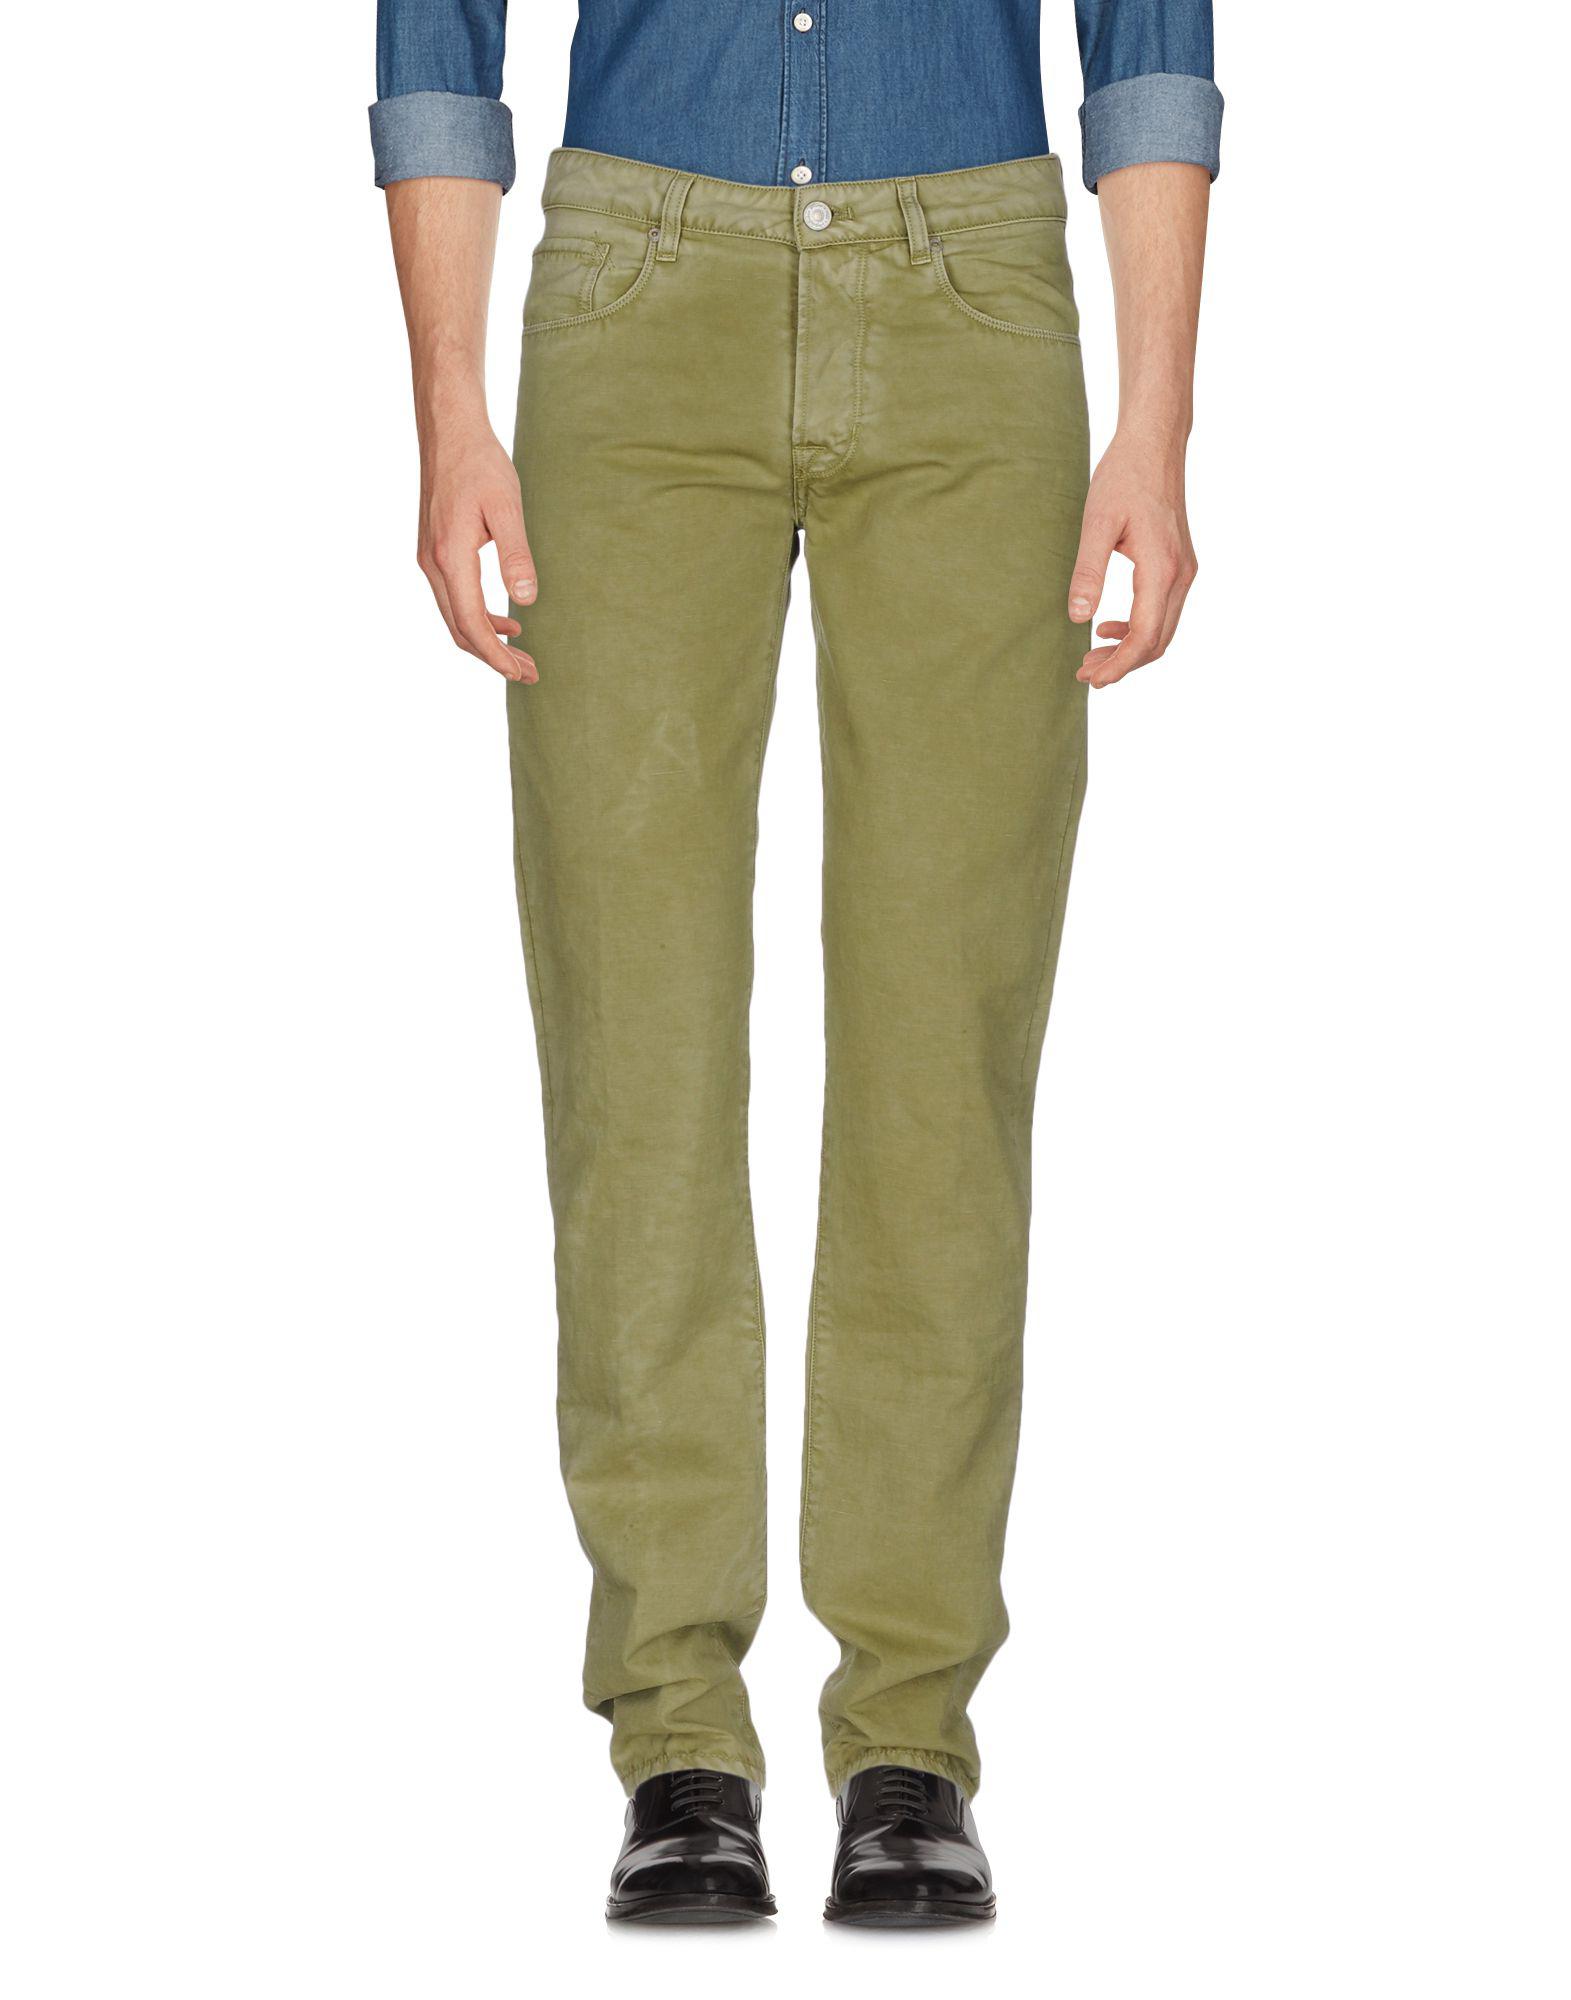 Pt05 Leather Casual Trouser in Light Green (Green) for Men - Lyst